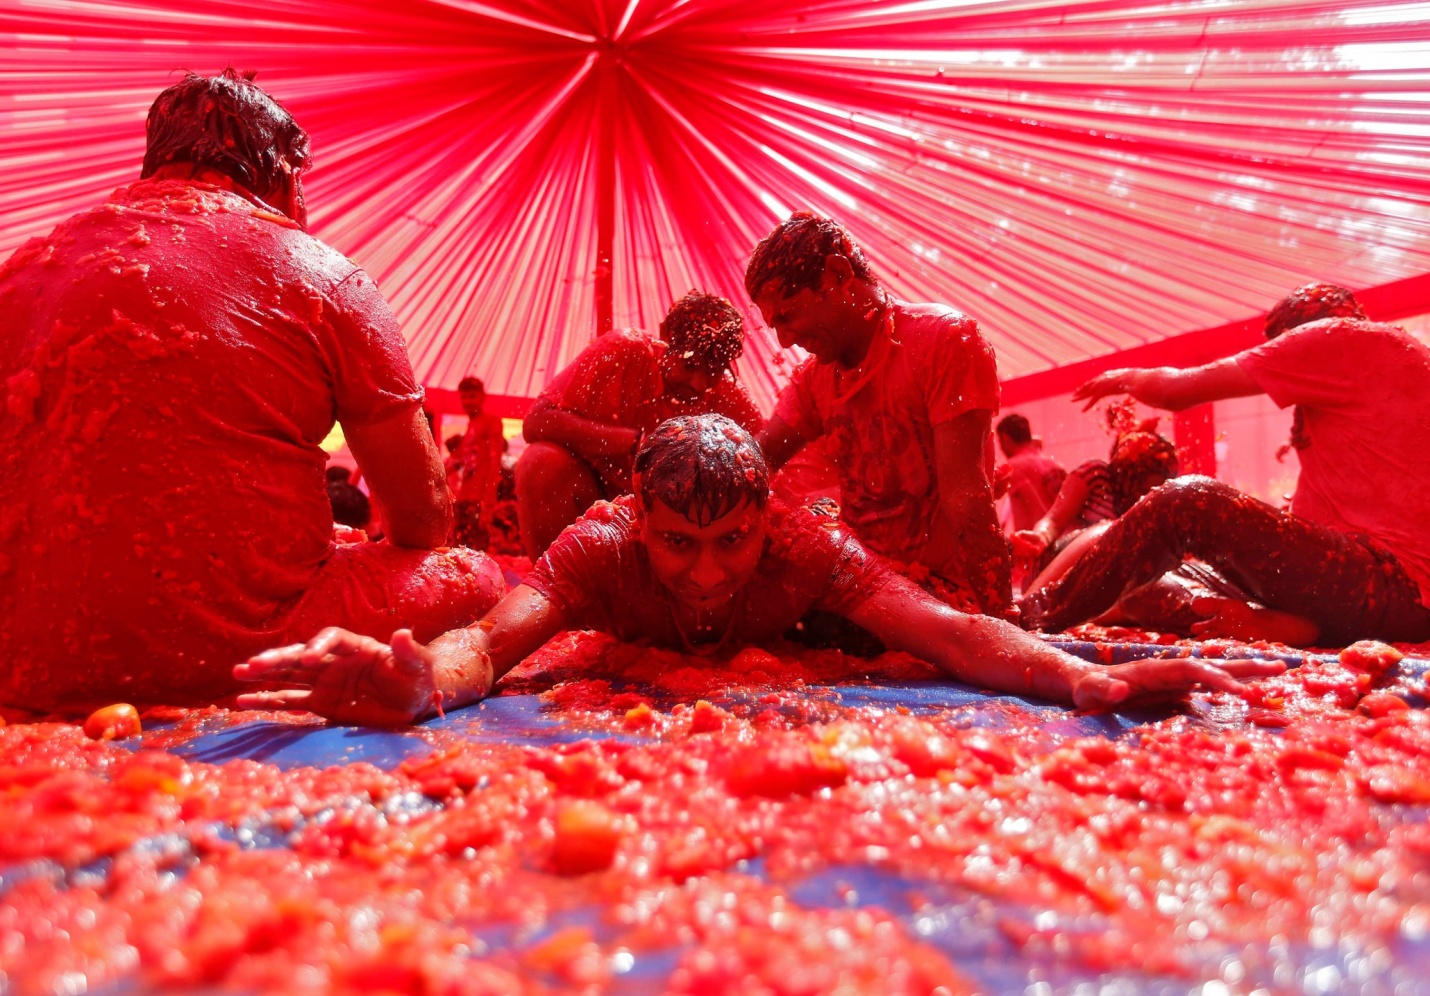 Holi pictures - festival of colors - spring - holi being celebrated using tomatoes in ahmedabad